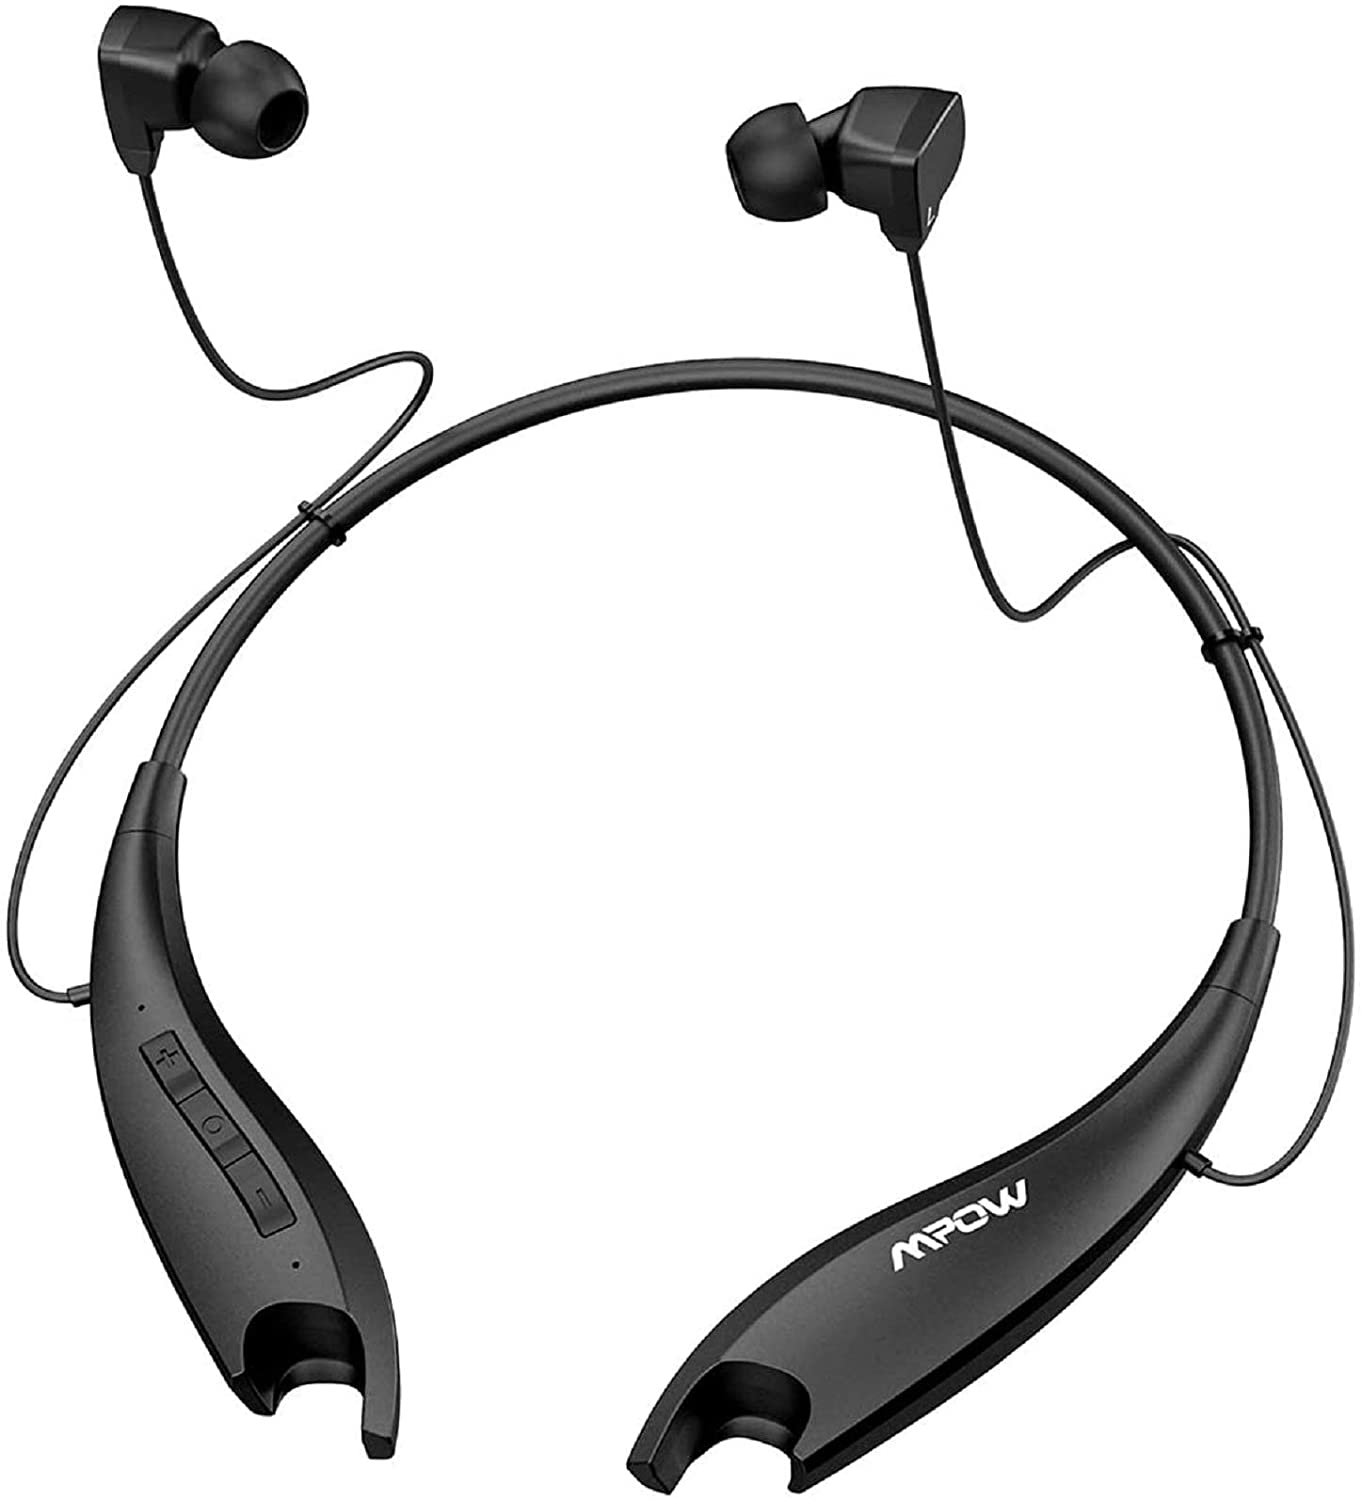 10 Best bluetooth headsets reviews & buyer's guide